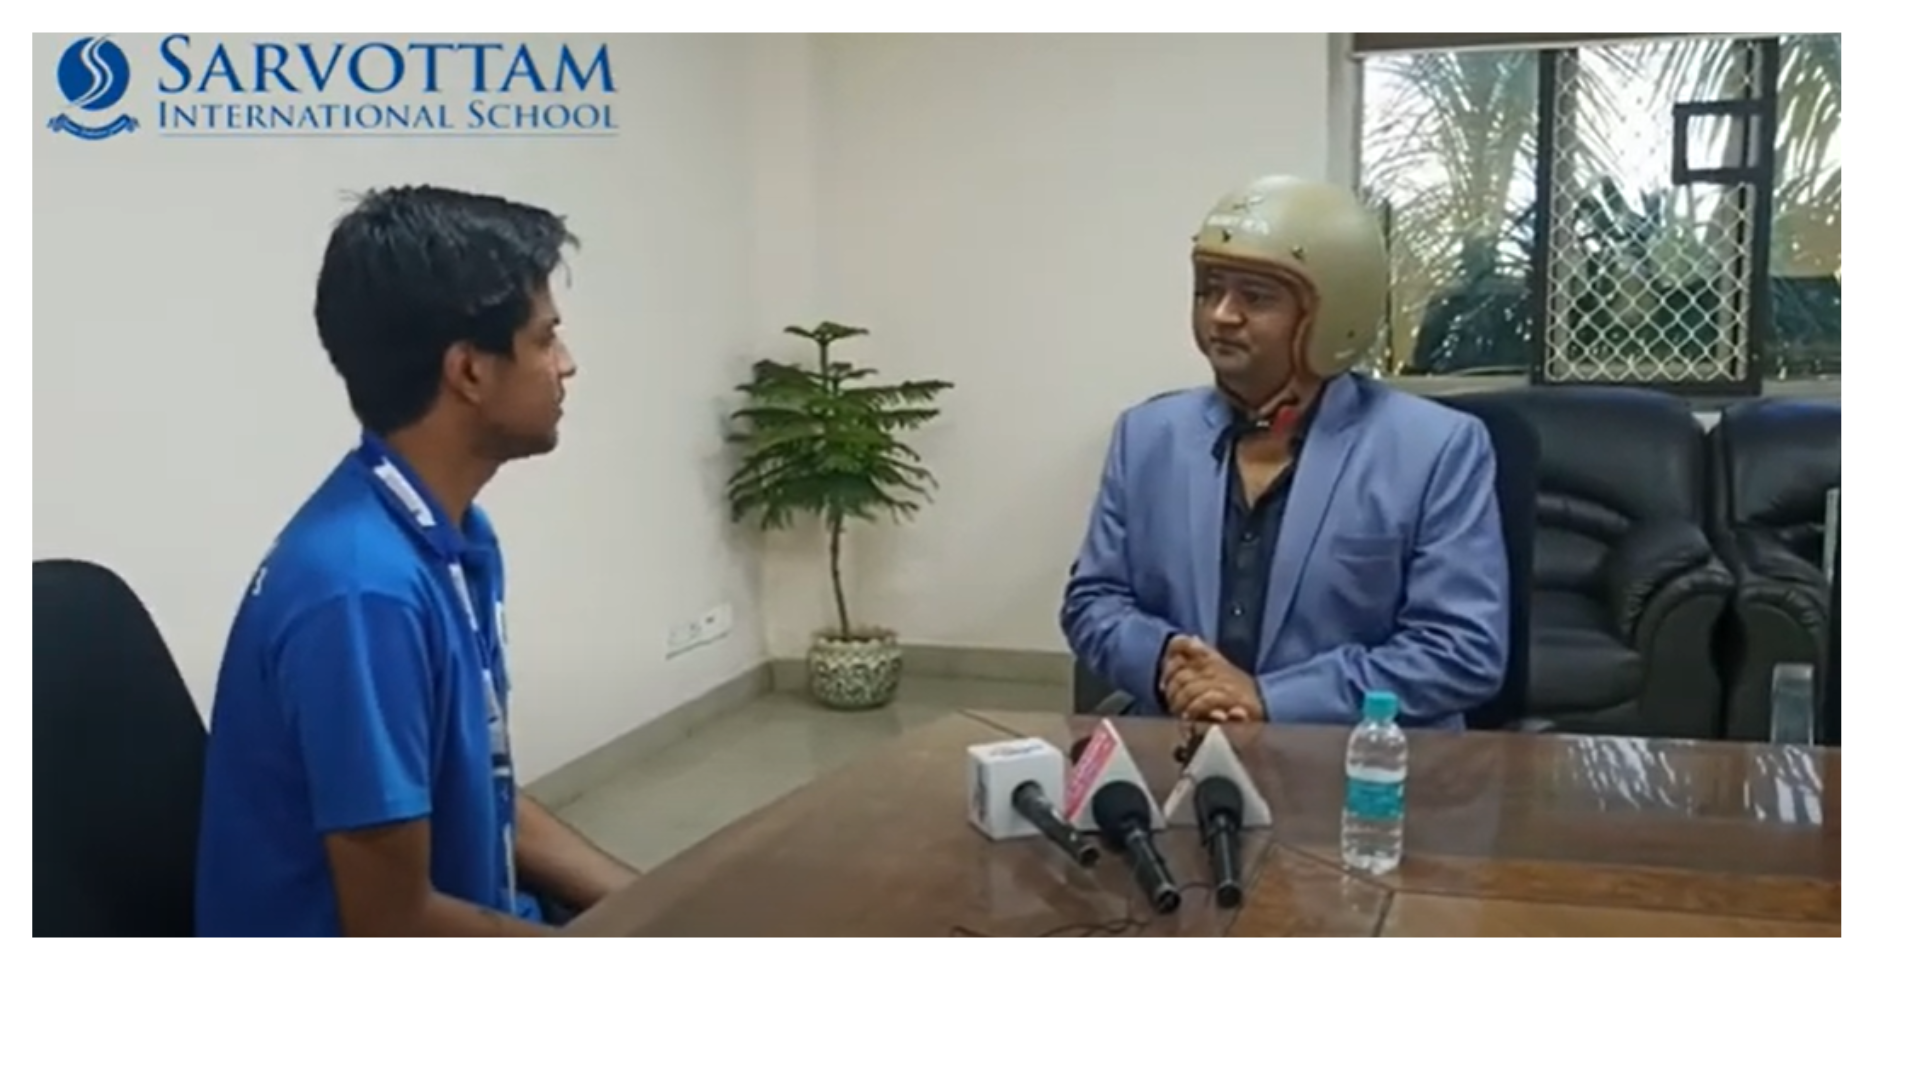 In conversation with Helmet Man of India